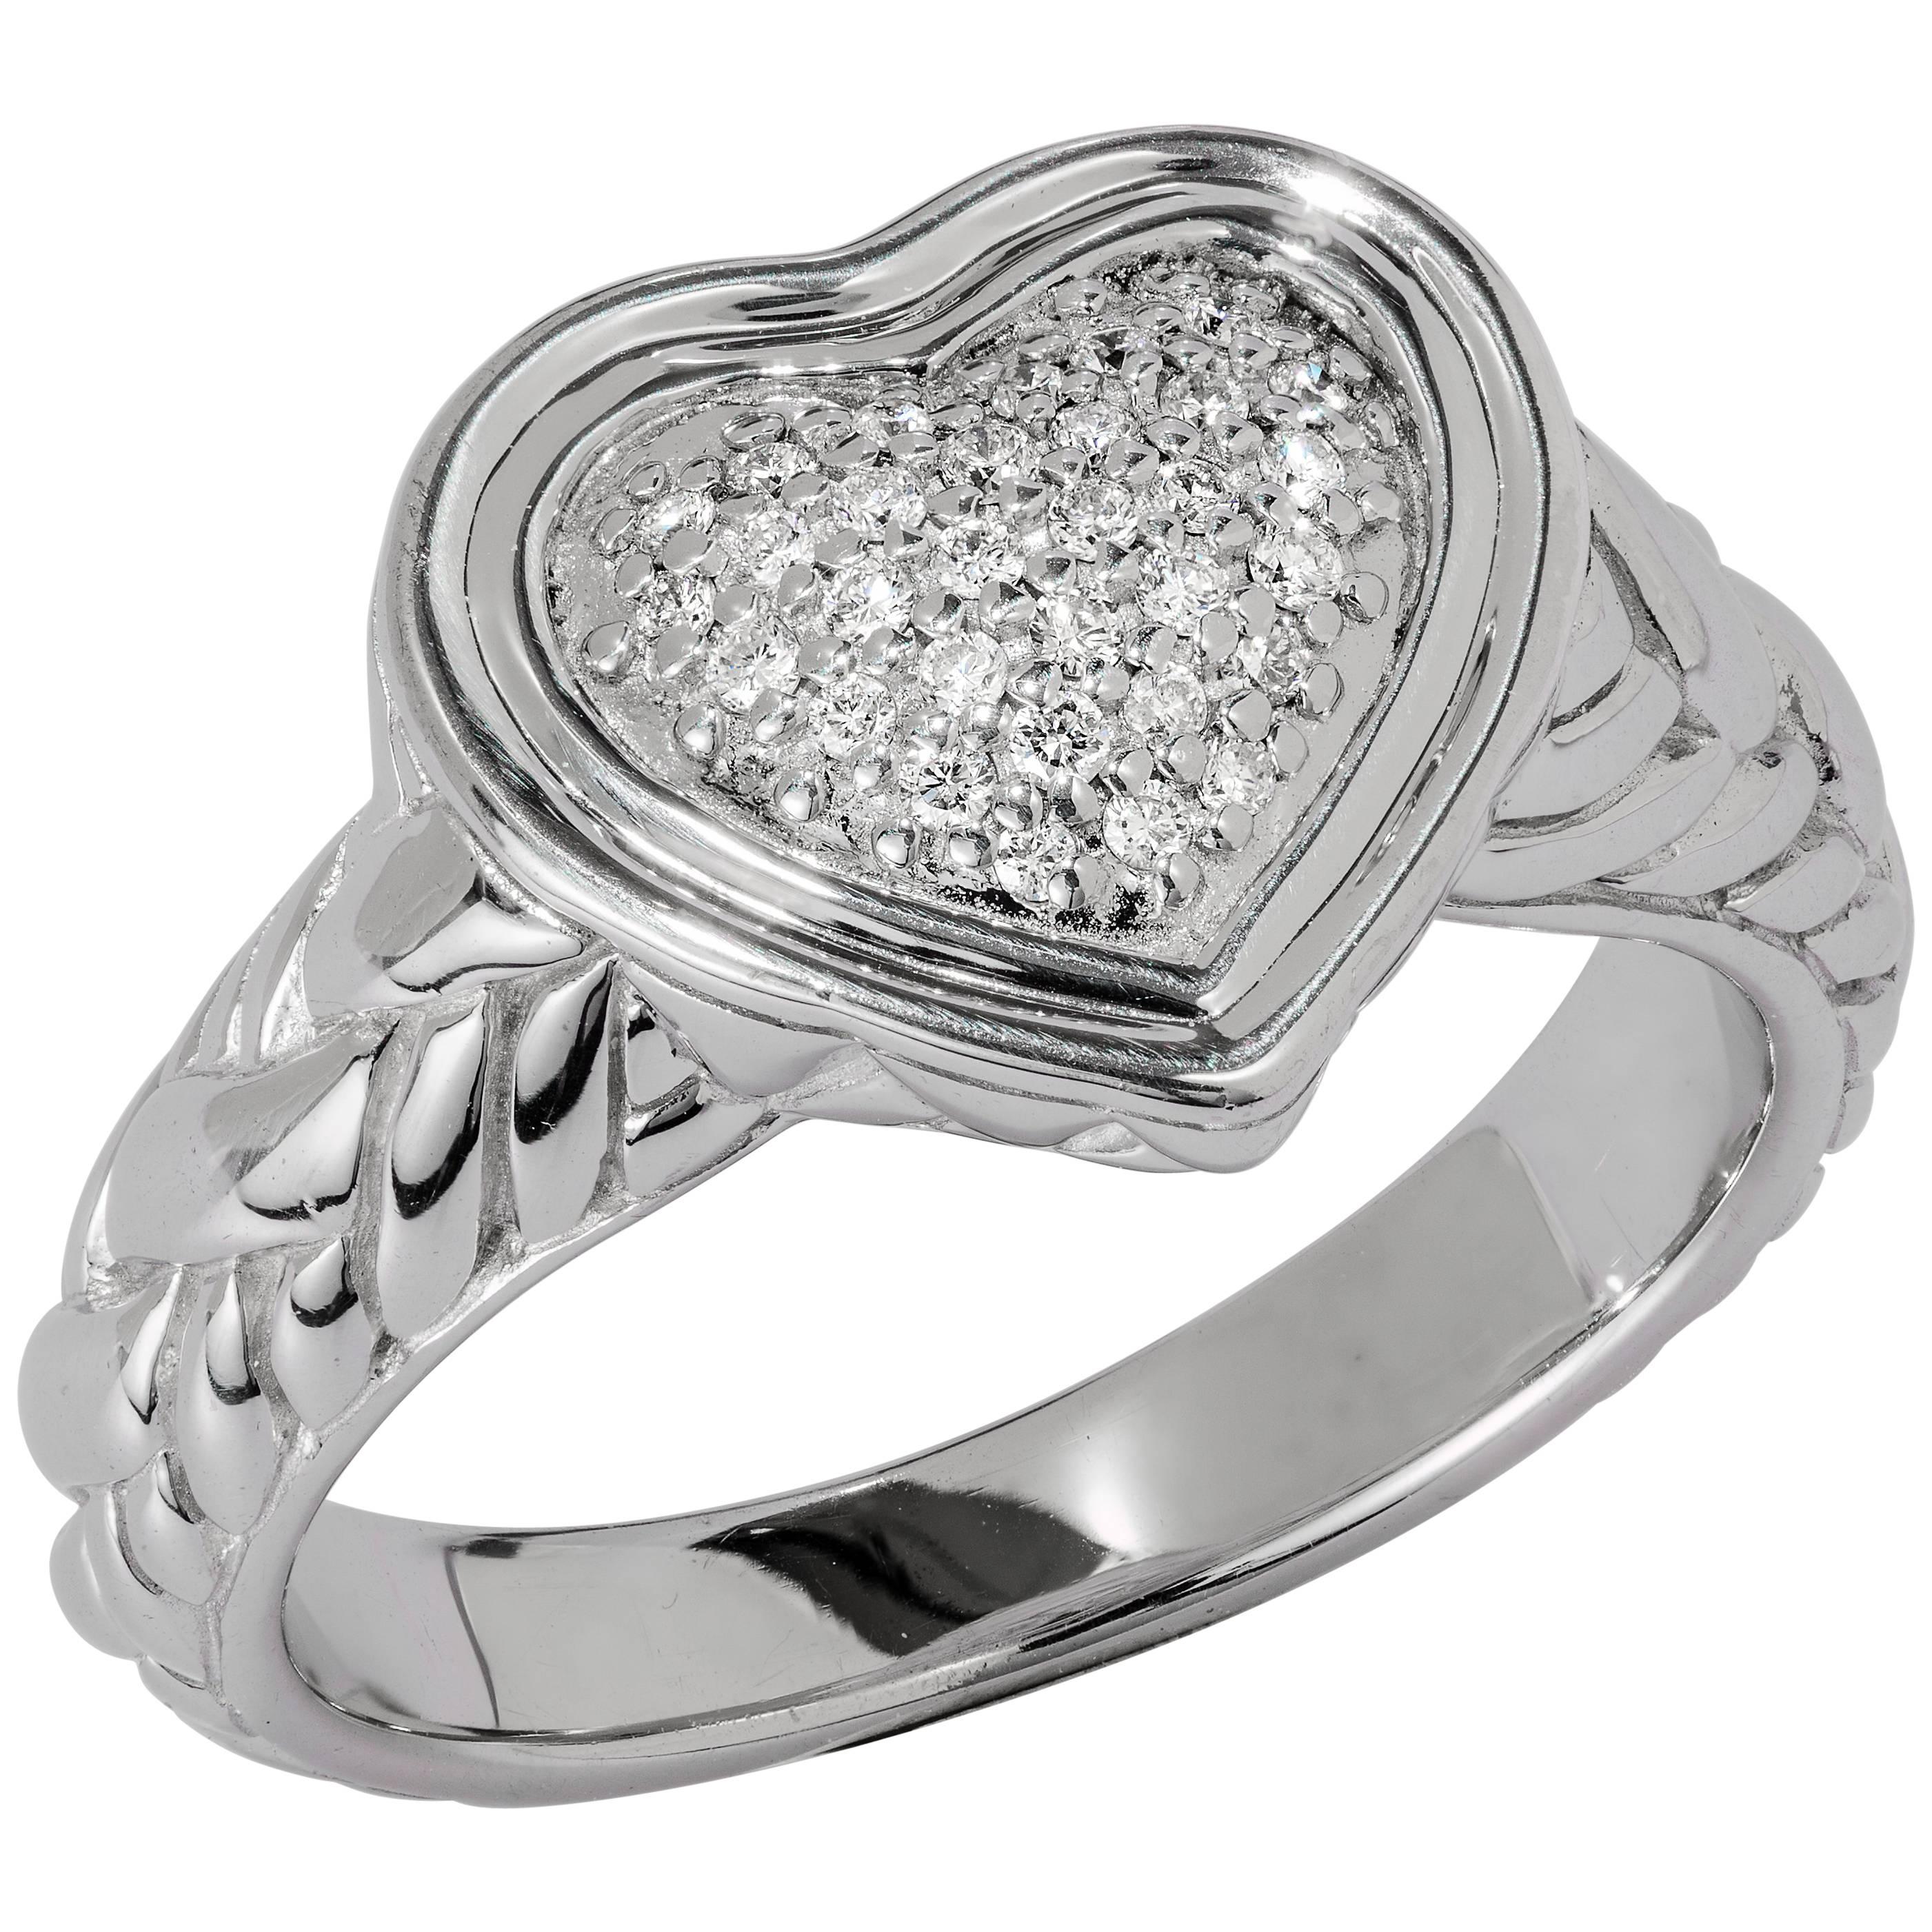 John Hardy Sterling Silver and 0.15 Carat Diamond Heart Ring For Sale